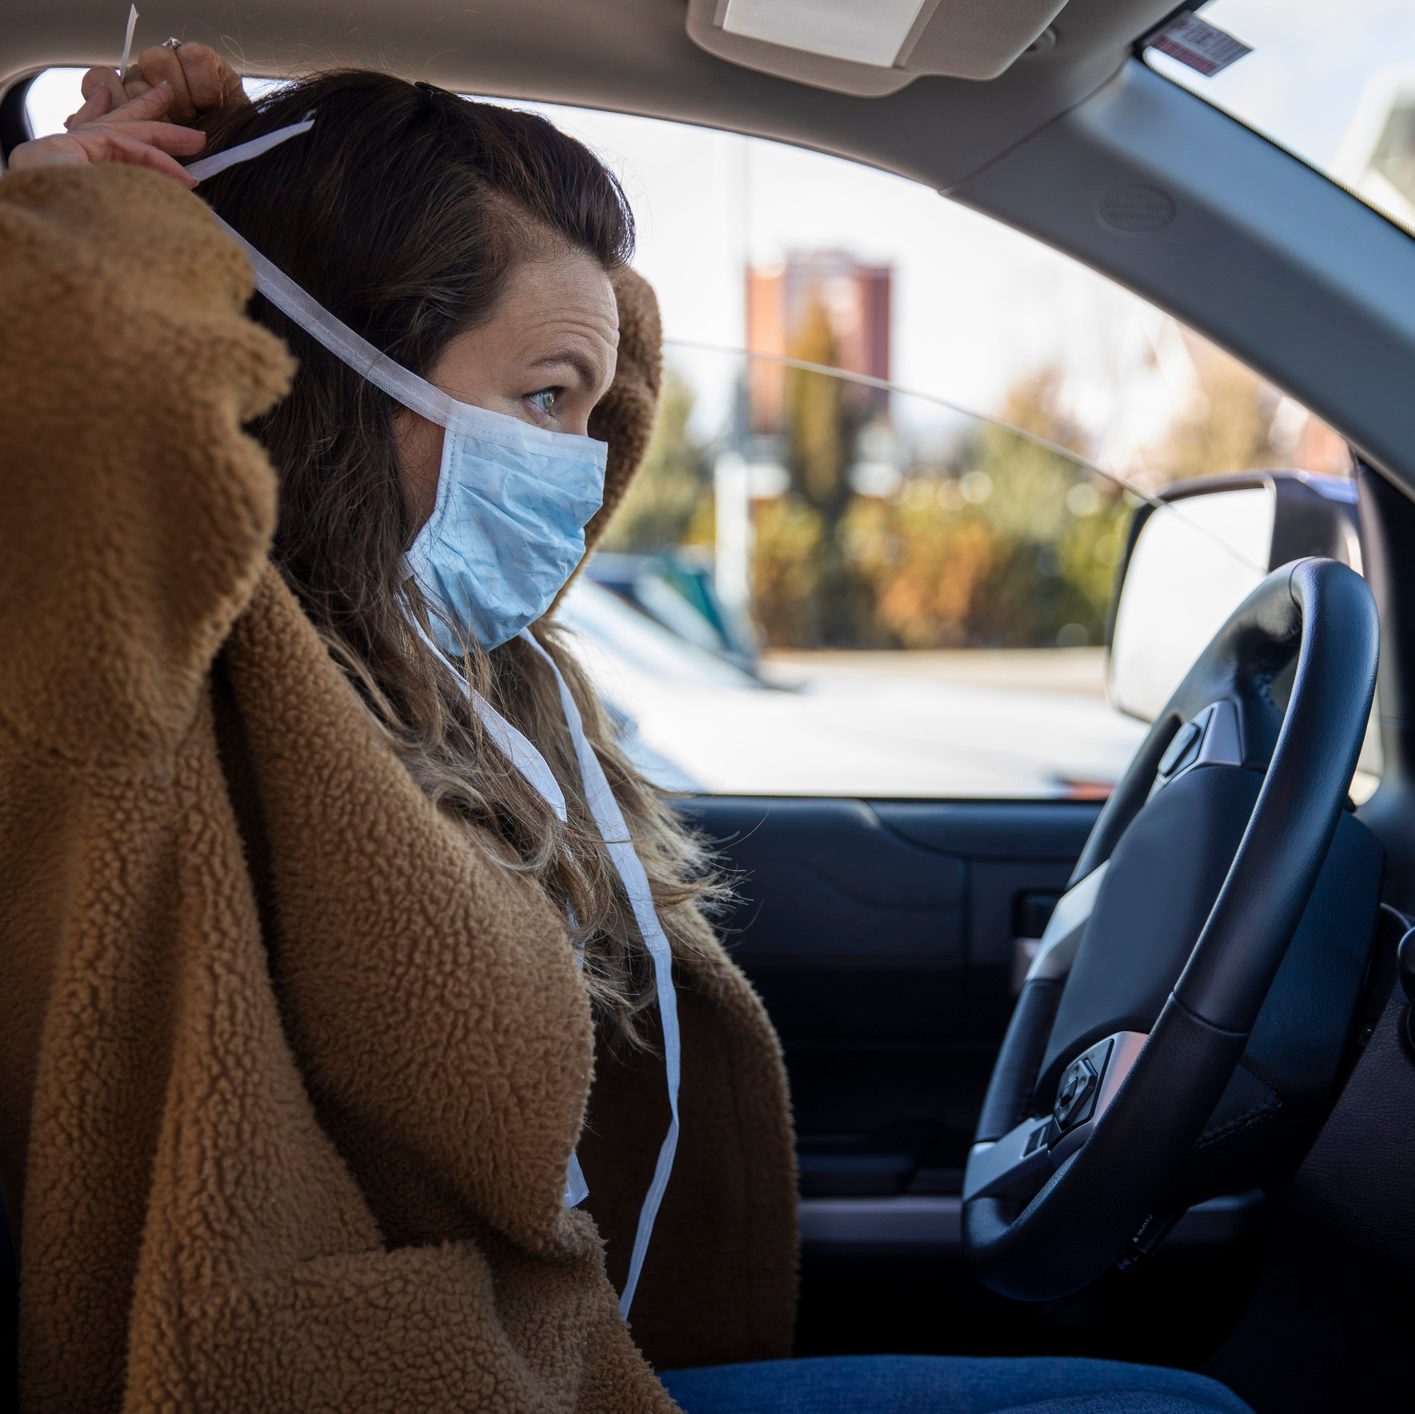 A woman driving her vehicle wearing latex gloves and a mask during the COVID-19 pandemic.